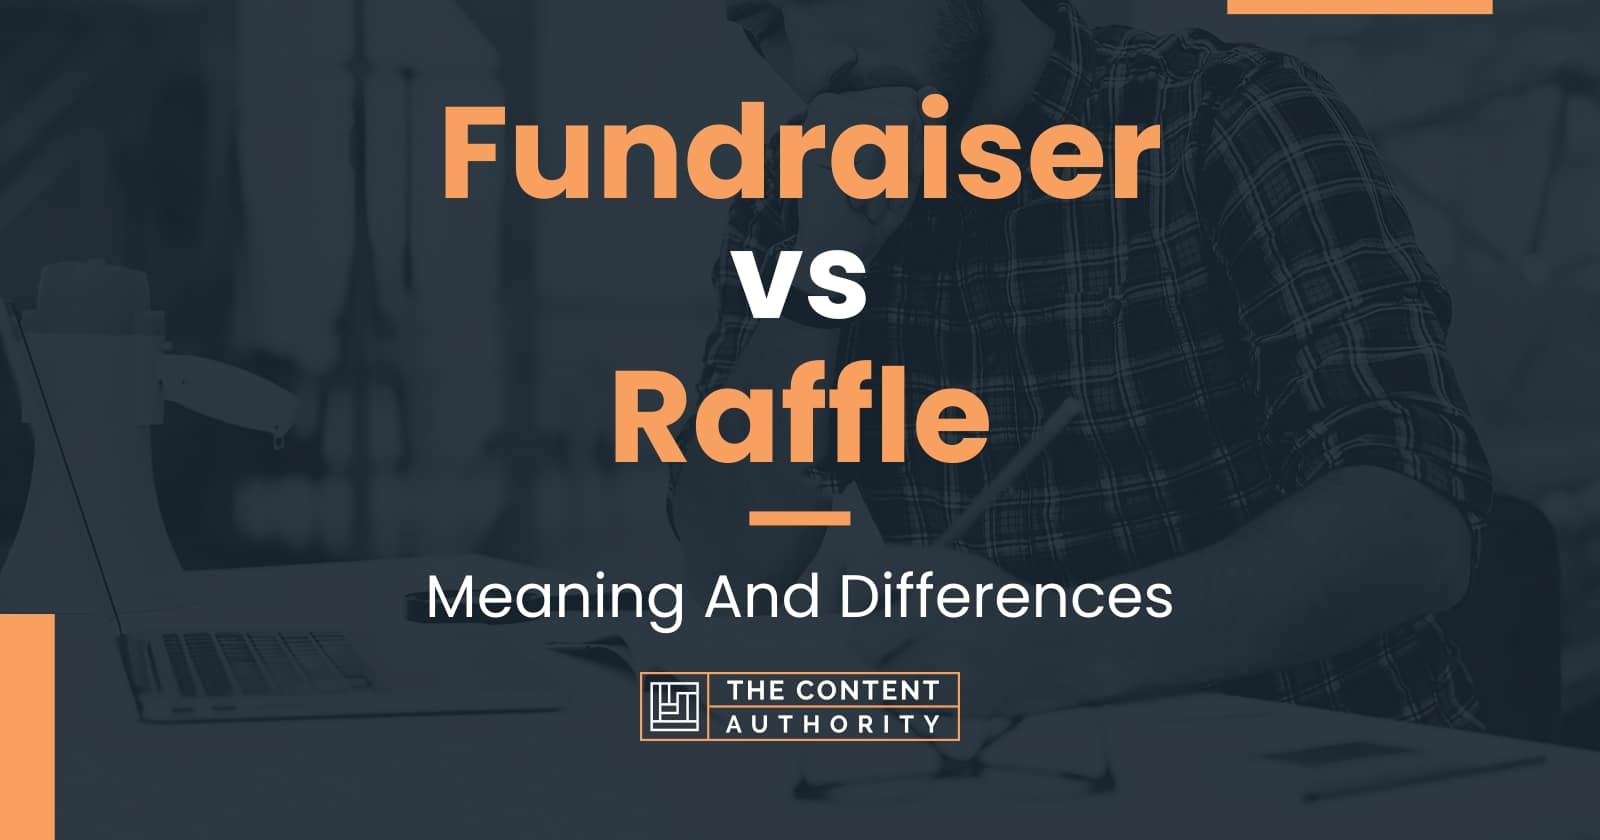 Fundraiser vs Raffle Meaning And Differences